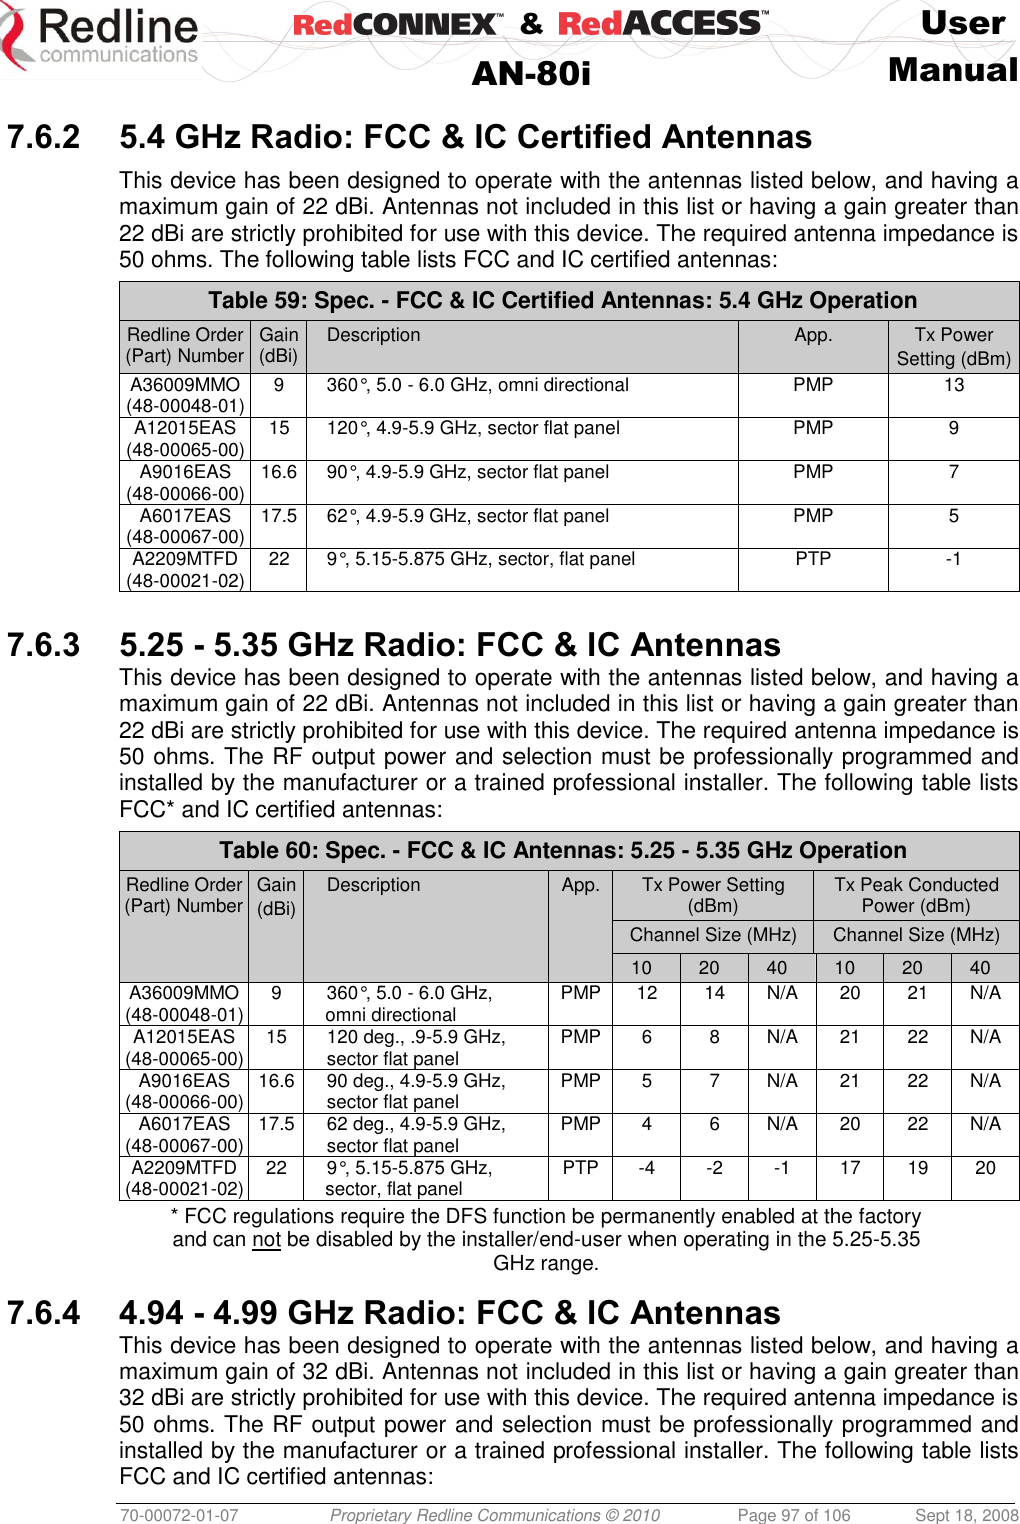    &amp;  User  AN-80i Manual  70-00072-01-07 Proprietary Redline Communications © 2010  Page 97 of 106  Sept 18, 2008  7.6.2 5.4 GHz Radio: FCC &amp; IC Certified Antennas  This device has been designed to operate with the antennas listed below, and having a maximum gain of 22 dBi. Antennas not included in this list or having a gain greater than 22 dBi are strictly prohibited for use with this device. The required antenna impedance is 50 ohms. The following table lists FCC and IC certified antennas: Table 59: Spec. - FCC &amp; IC Certified Antennas: 5.4 GHz Operation Redline Order (Part) Number Gain (dBi) Description App. Tx Power Setting (dBm) A36009MMO (48-00048-01) 9 360°, 5.0 - 6.0 GHz, omni directional PMP 13 A12015EAS  (48-00065-00) 15 120°, 4.9-5.9 GHz, sector flat panel PMP 9 A9016EAS (48-00066-00) 16.6 90°, 4.9-5.9 GHz, sector flat panel PMP 7 A6017EAS (48-00067-00) 17.5 62°, 4.9-5.9 GHz, sector flat panel PMP 5 A2209MTFD (48-00021-02) 22 9°, 5.15-5.875 GHz, sector, flat panel PTP -1  7.6.3 5.25 - 5.35 GHz Radio: FCC &amp; IC Antennas This device has been designed to operate with the antennas listed below, and having a maximum gain of 22 dBi. Antennas not included in this list or having a gain greater than 22 dBi are strictly prohibited for use with this device. The required antenna impedance is 50 ohms. The RF output power and selection must be professionally programmed and installed by the manufacturer or a trained professional installer. The following table lists FCC* and IC certified antennas: Table 60: Spec. - FCC &amp; IC Antennas: 5.25 - 5.35 GHz Operation Redline Order (Part) Number Gain (dBi) Description App. Tx Power Setting (dBm) Tx Peak Conducted Power (dBm) Channel Size (MHz) Channel Size (MHz) 10 20 40 10 20 40 A36009MMO (48-00048-01) 9 360°, 5.0 - 6.0 GHz, omni directional PMP 12 14 N/A 20 21 N/A A12015EAS  (48-00065-00) 15 120 deg., .9-5.9 GHz, sector flat panel PMP 6 8 N/A 21 22 N/A A9016EAS (48-00066-00) 16.6 90 deg., 4.9-5.9 GHz, sector flat panel PMP 5 7 N/A 21 22 N/A A6017EAS (48-00067-00) 17.5 62 deg., 4.9-5.9 GHz, sector flat panel PMP 4 6 N/A 20 22 N/A A2209MTFD (48-00021-02) 22 9°, 5.15-5.875 GHz, sector, flat panel PTP -4 -2 -1 17 19 20 * FCC regulations require the DFS function be permanently enabled at the factory and can not be disabled by the installer/end-user when operating in the 5.25-5.35 GHz range.  7.6.4 4.94 - 4.99 GHz Radio: FCC &amp; IC Antennas This device has been designed to operate with the antennas listed below, and having a maximum gain of 32 dBi. Antennas not included in this list or having a gain greater than 32 dBi are strictly prohibited for use with this device. The required antenna impedance is 50 ohms. The RF output power and selection must be professionally programmed and installed by the manufacturer or a trained professional installer. The following table lists FCC and IC certified antennas: 